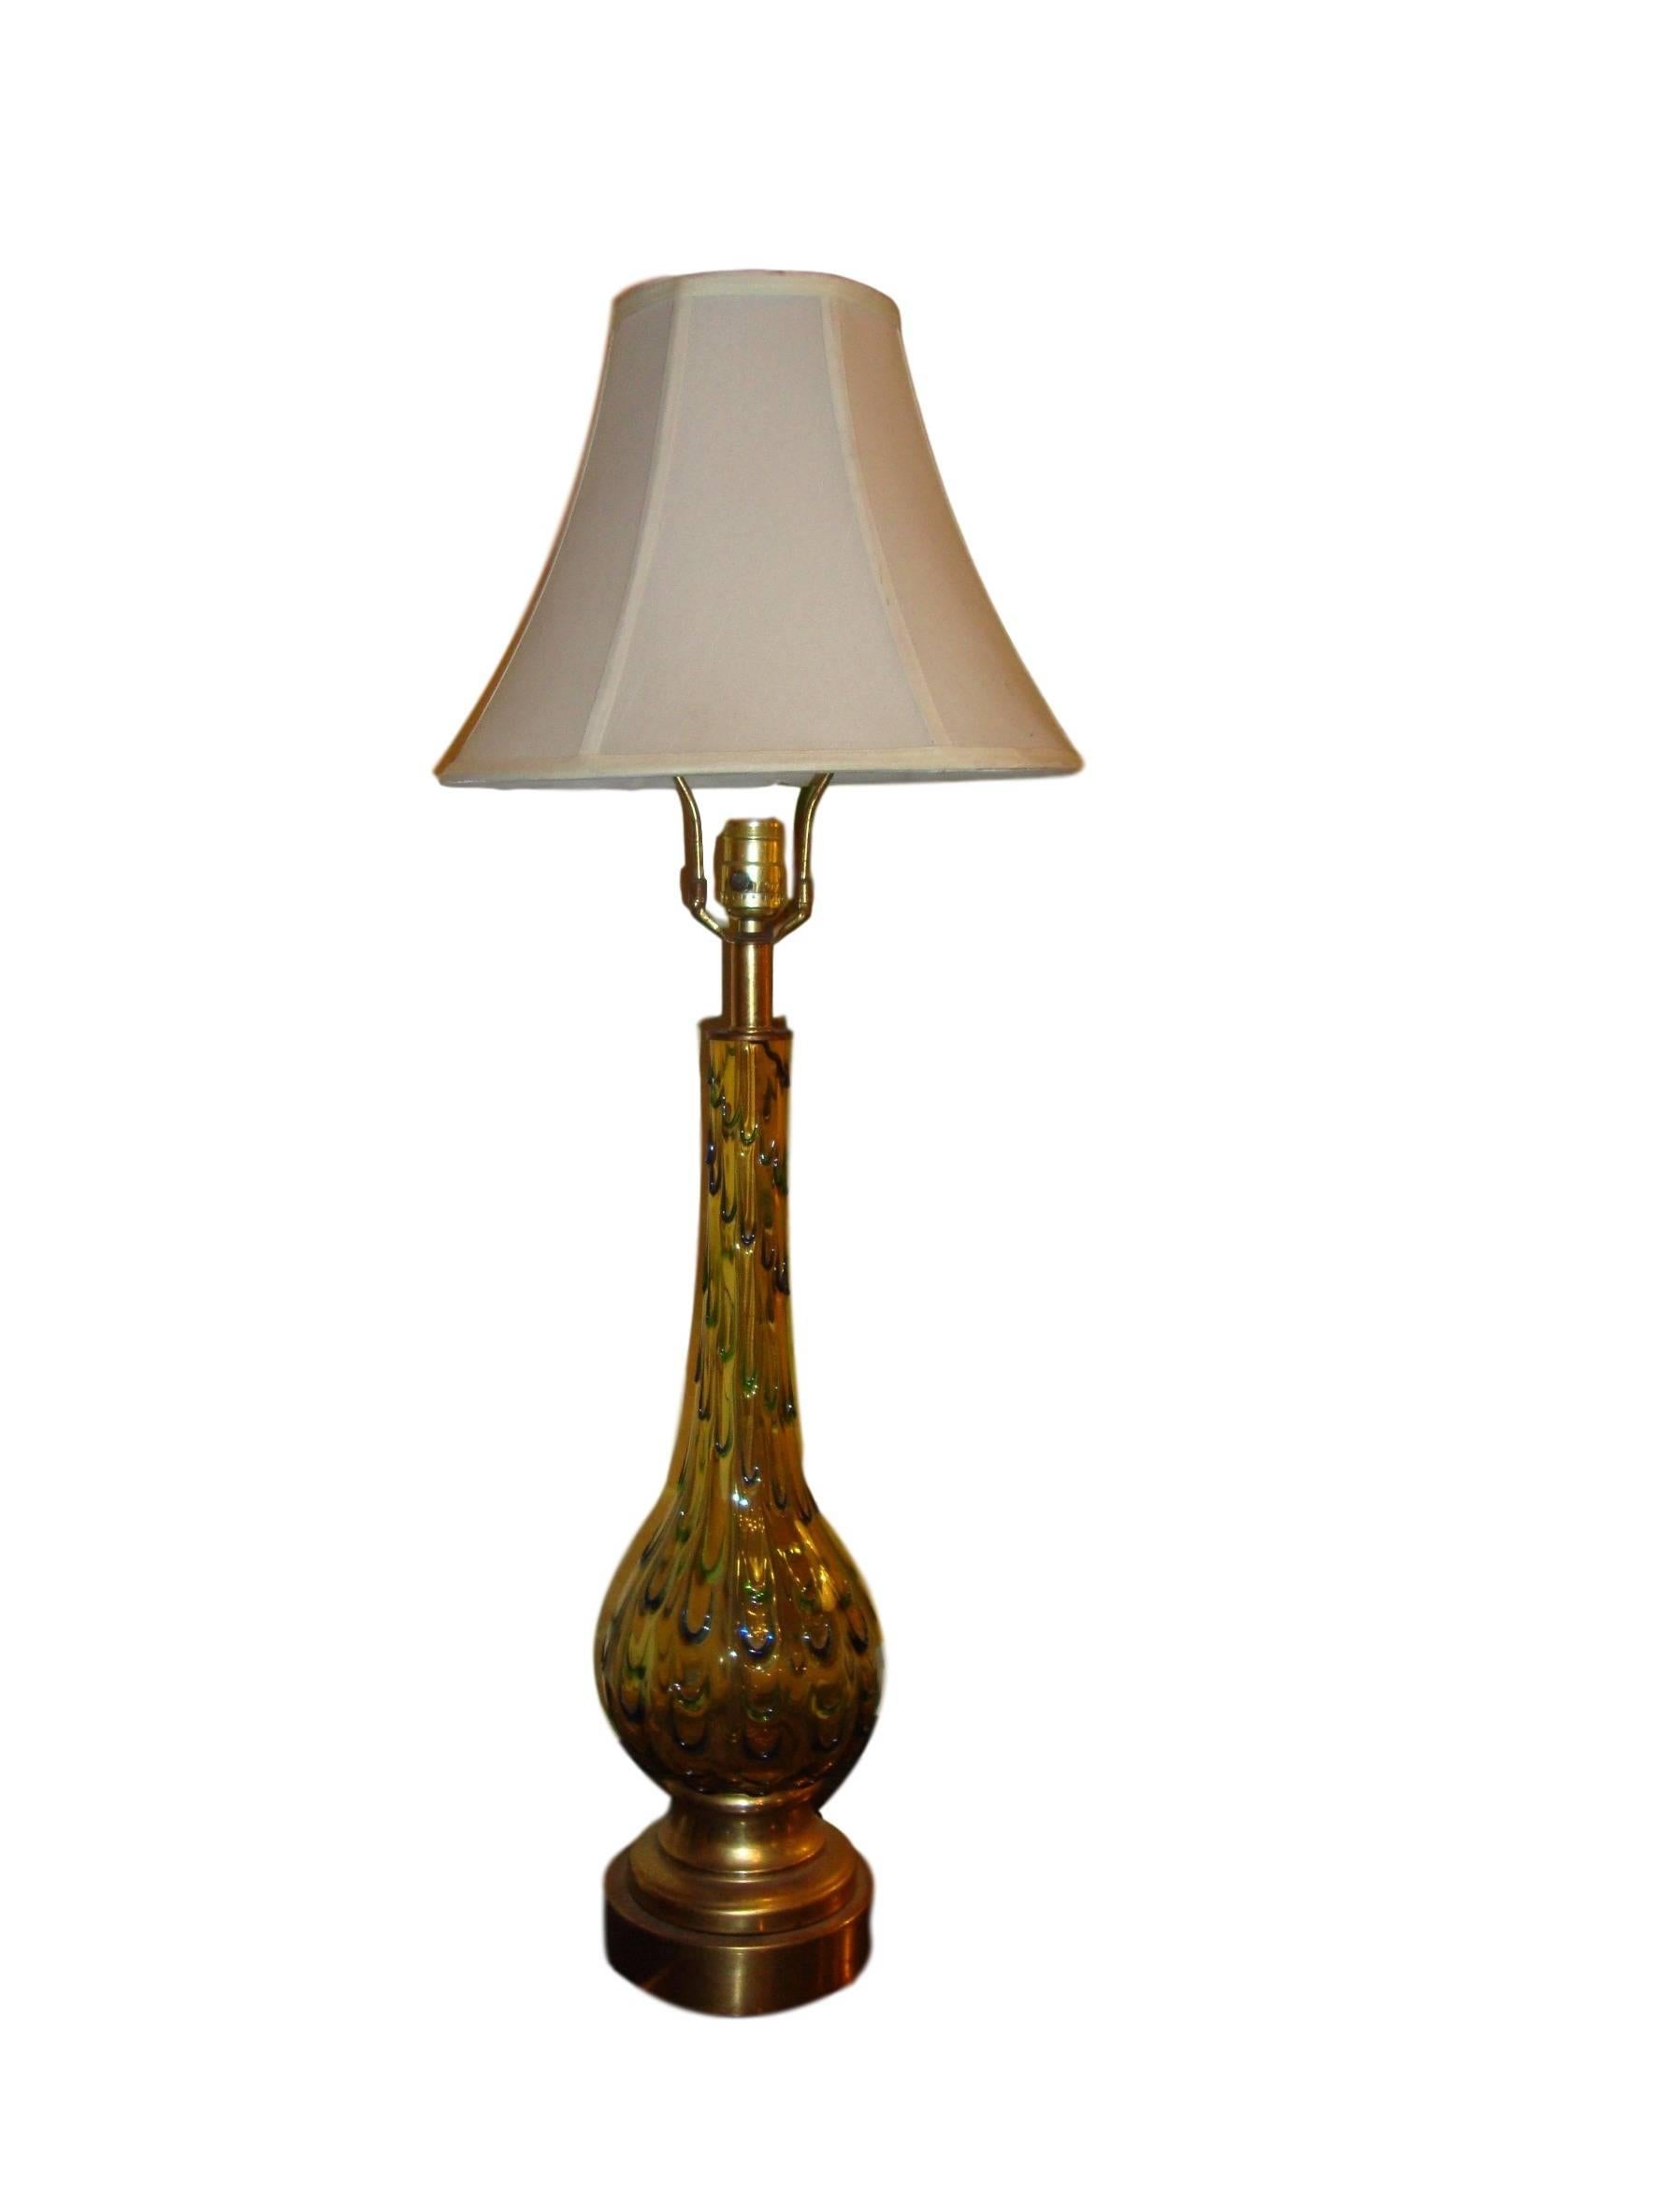 Pair of multicolored Murano glass table lamps. Each bulbous form base lamp leading to a long neck stem supporting a lampshade. Both on brass based. Having green, yellow, blue and a tinge of orange these lamps are not only stylish and decorative but